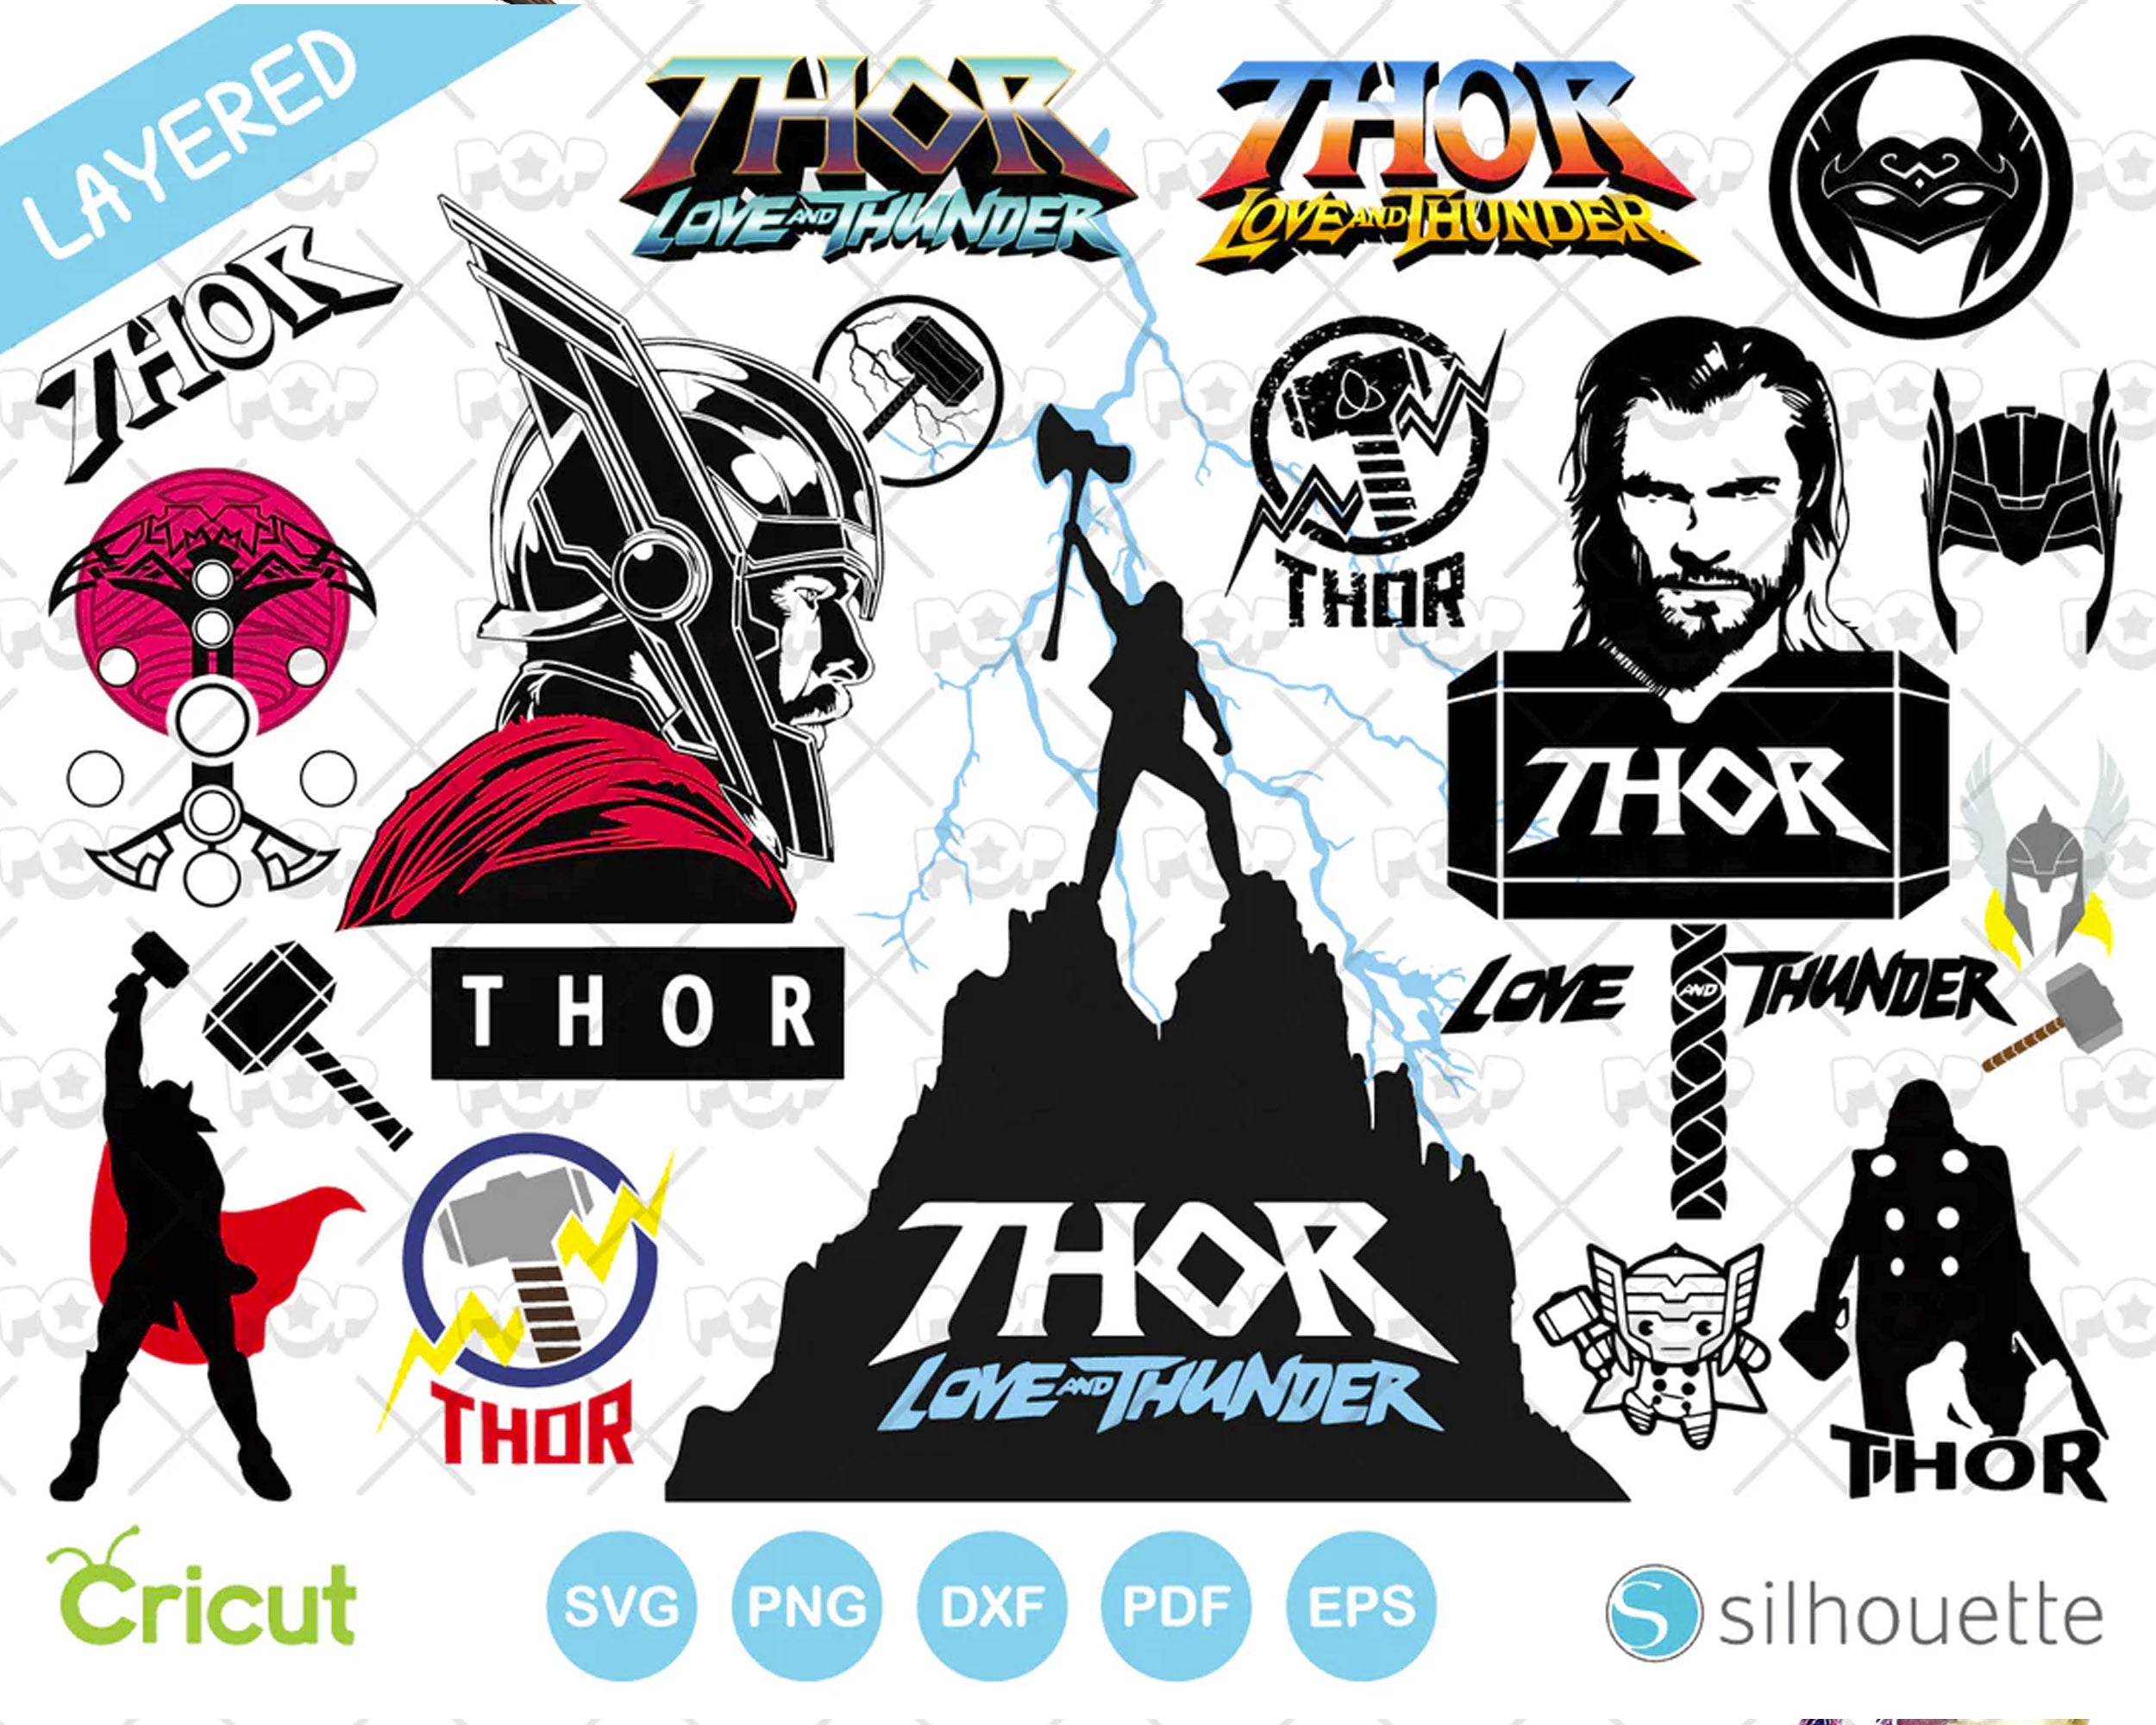 Thor Love and Thunder clipart set, SVG cut files for Cricut / Silhouette, Marvel SVG, Designs for sublimation